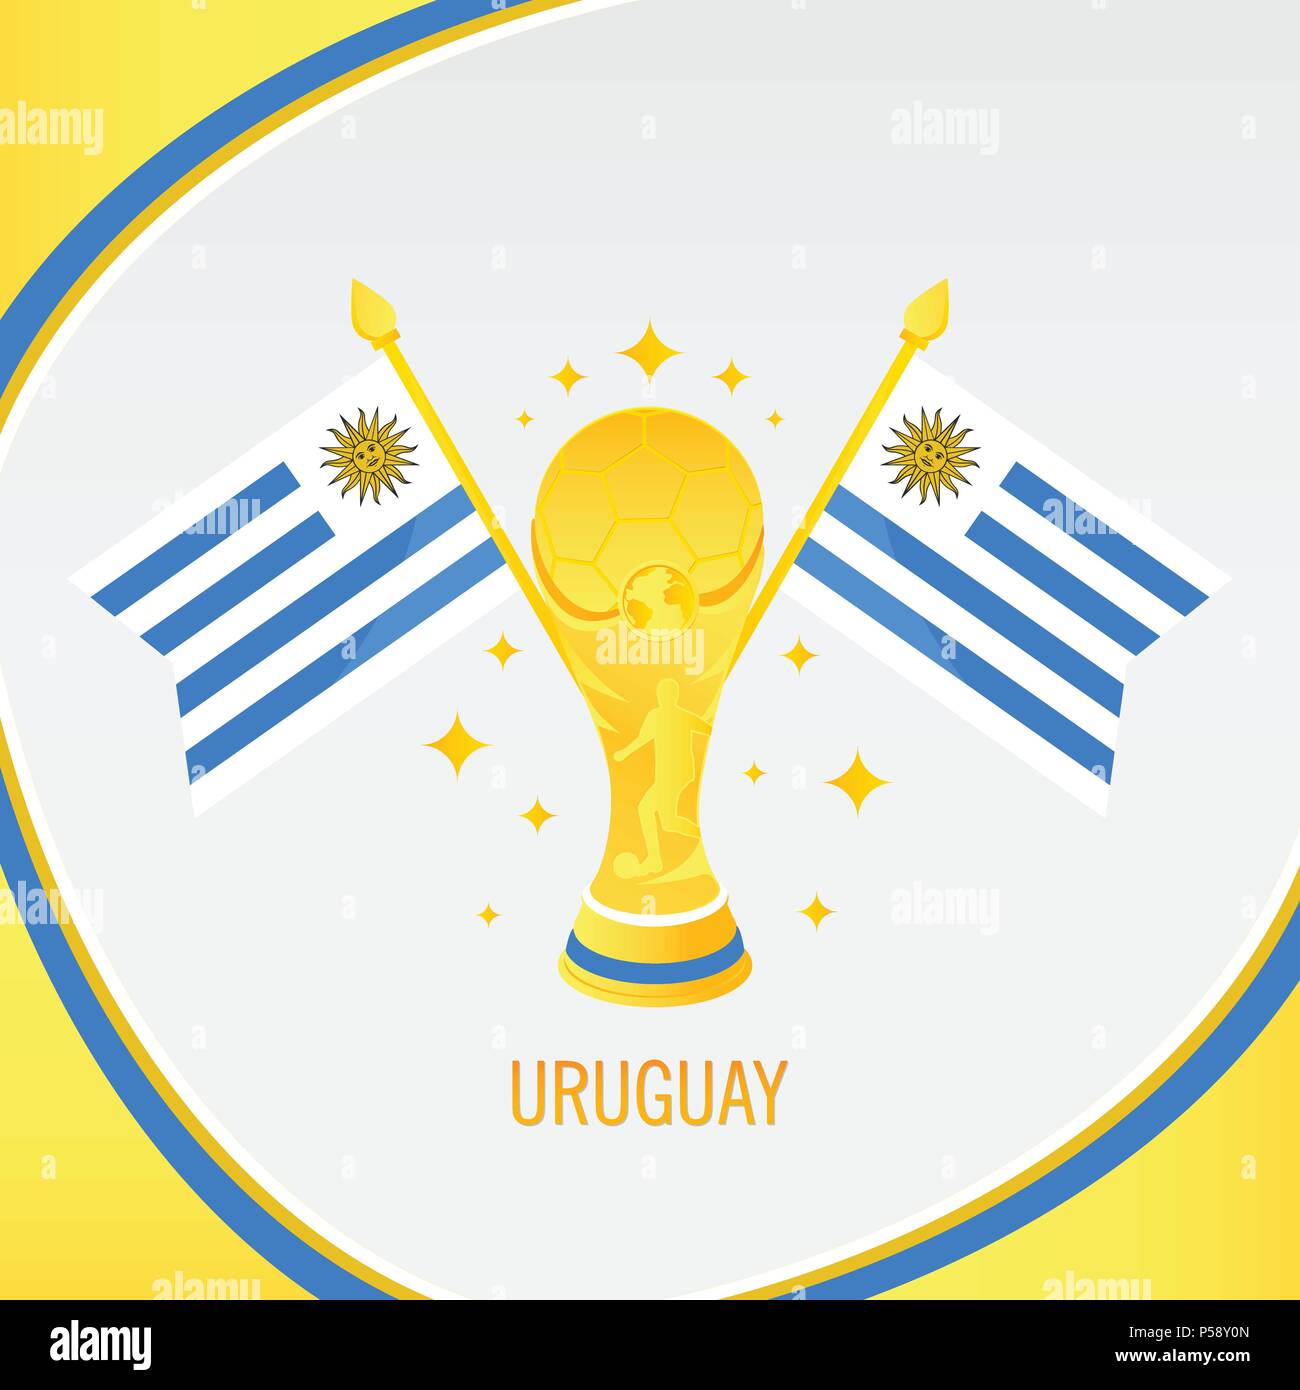 Uruguay Football Champion 2018 - Flag and Golden Trophy / Cup Stock Vector